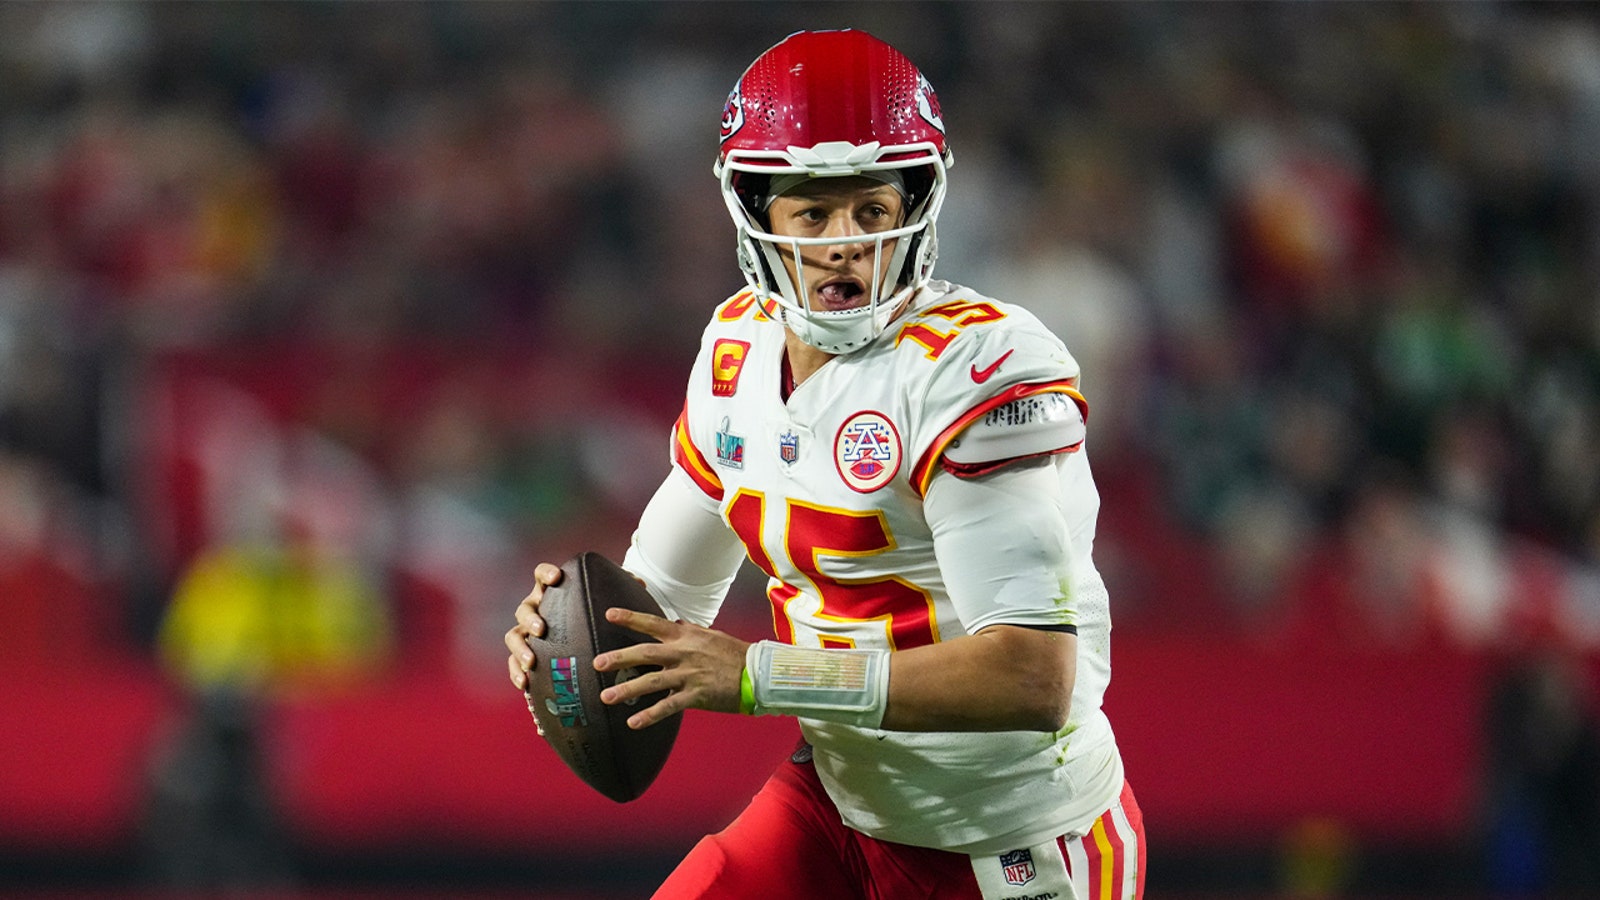 Mahomes is VERY STRONG in the Super Bowl 